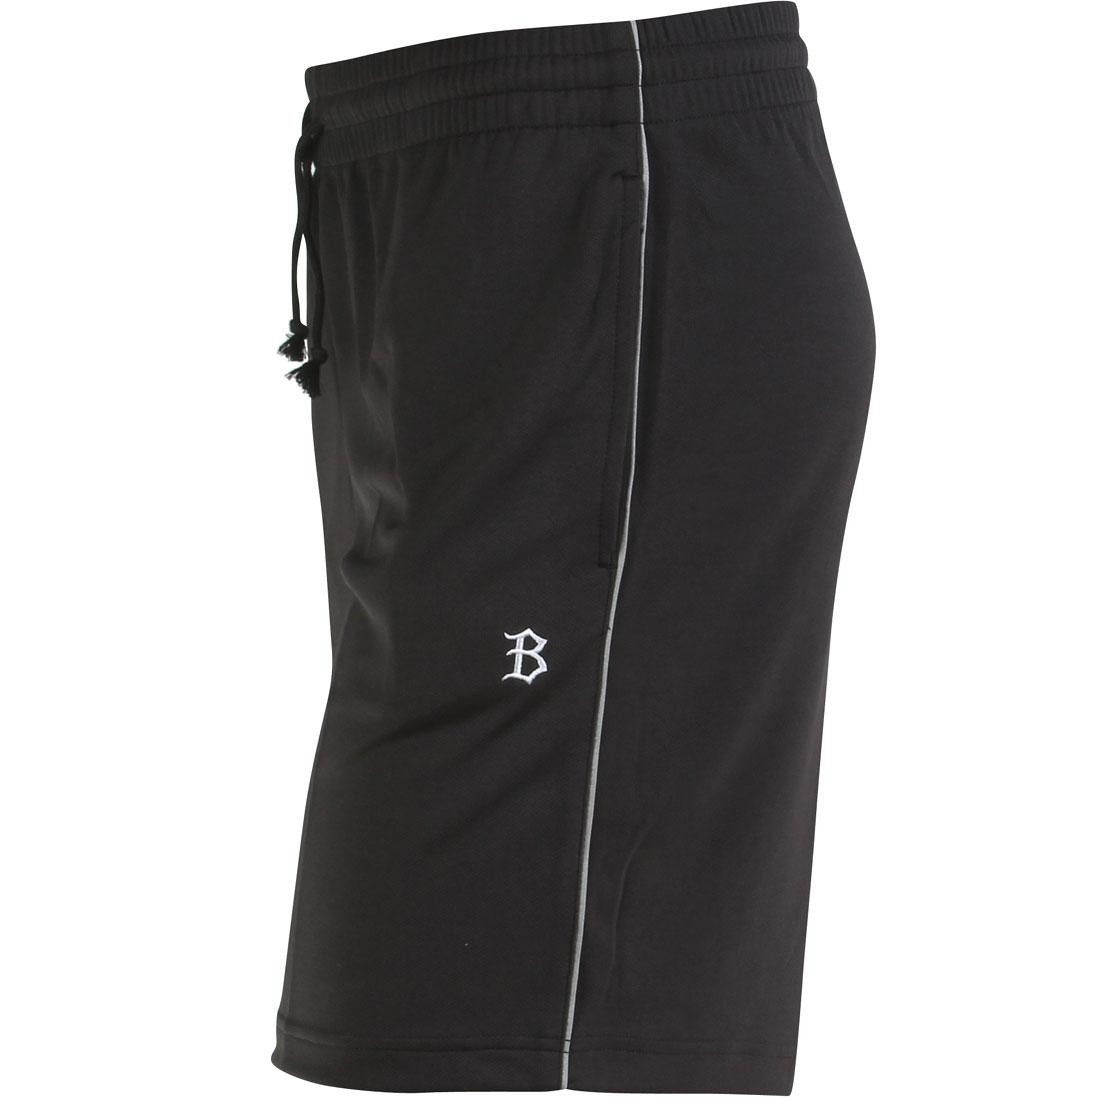 fitted basketball shorts